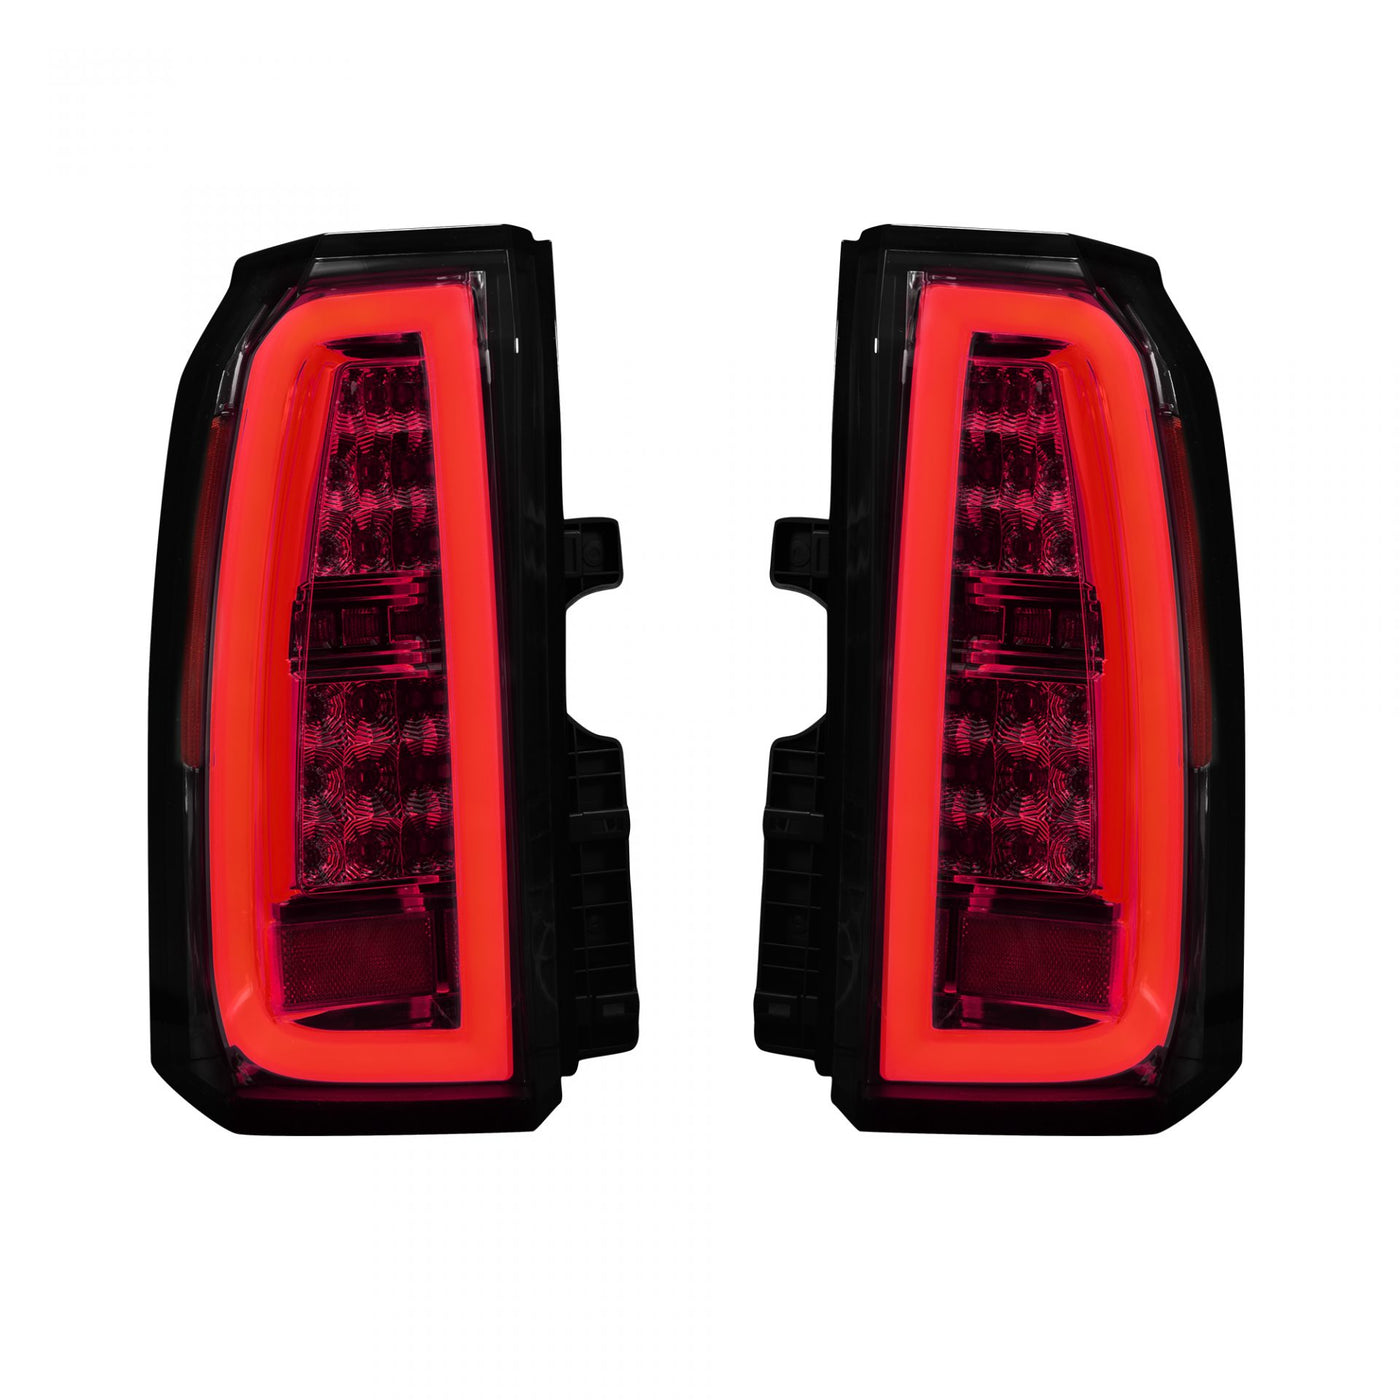 Chevy Tahoe Tail Lights, Chevy Suburban Tail Lights, Tail Lights, Smoked Tail Lights, Recon Tail Lights, Bar-Style Tail Lights